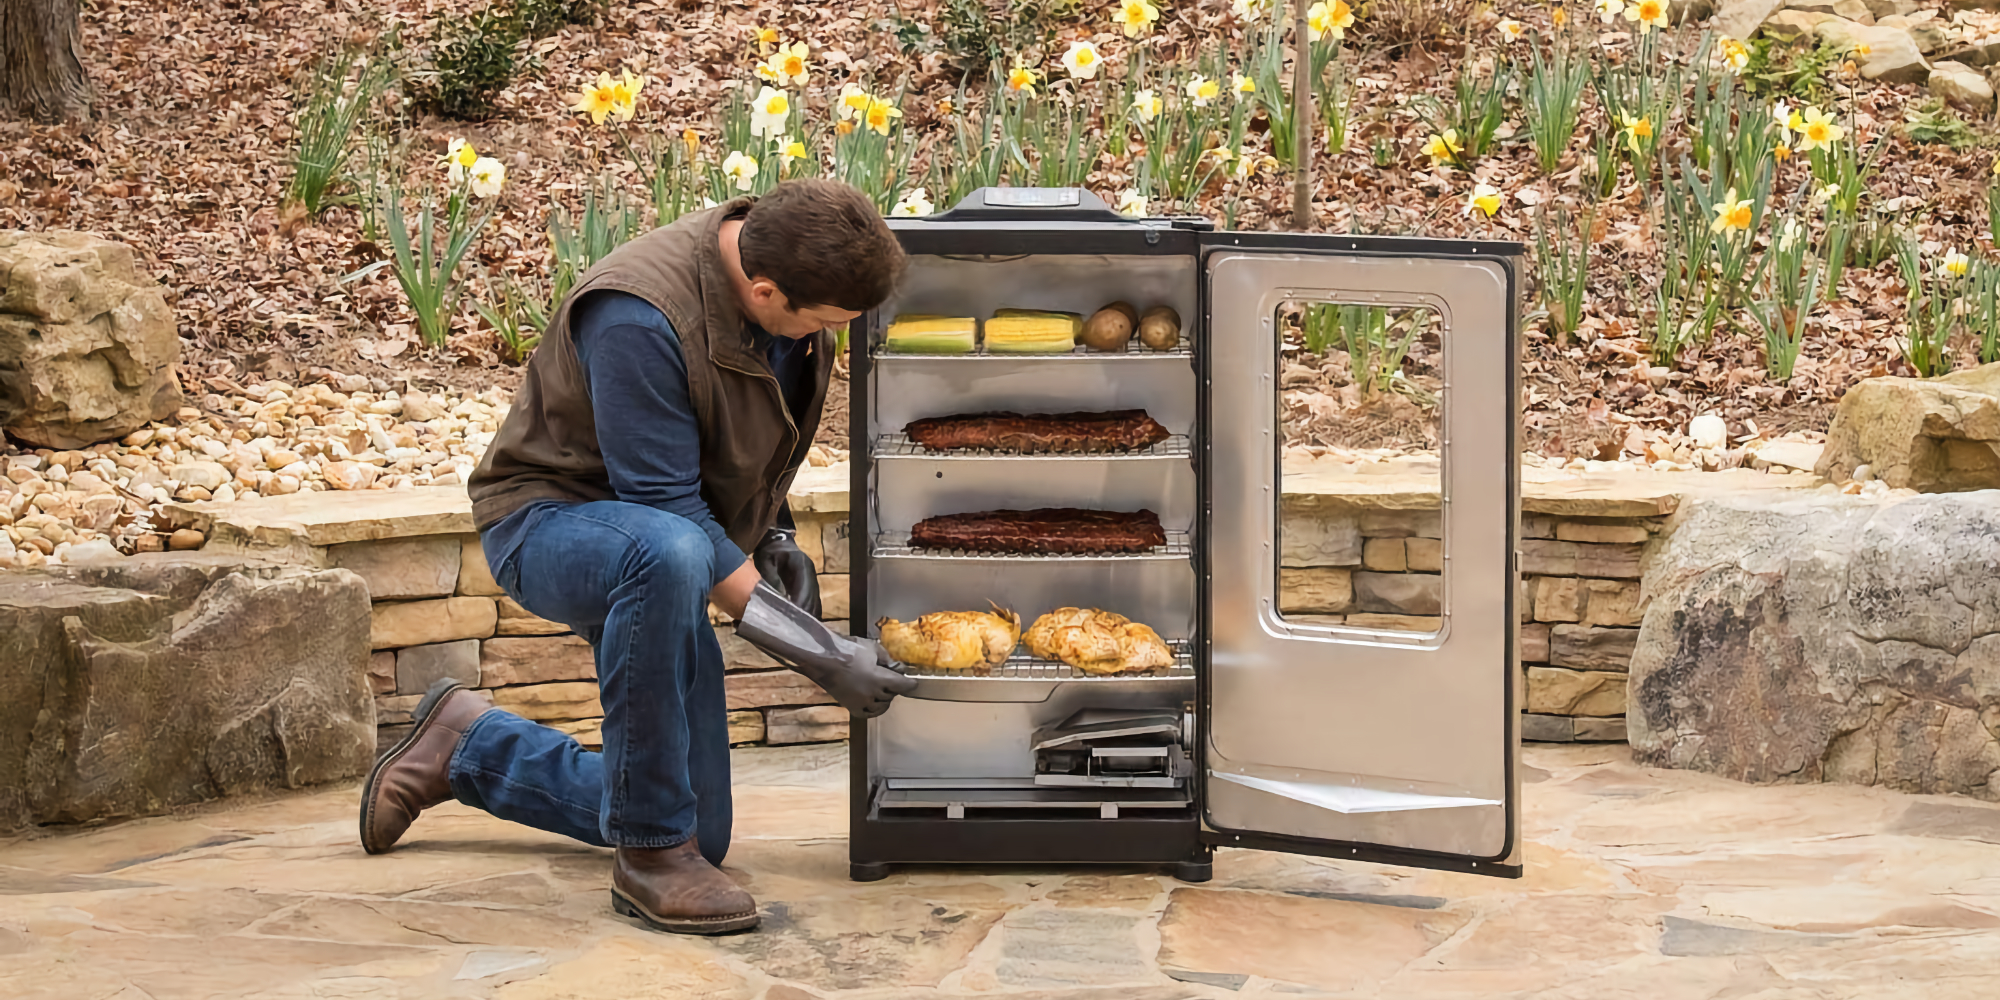 https://9to5toys.com/wp-content/uploads/sites/5/2021/06/Masterbuilt-40-inch-Bluetooth-Electric-Smoker.jpg